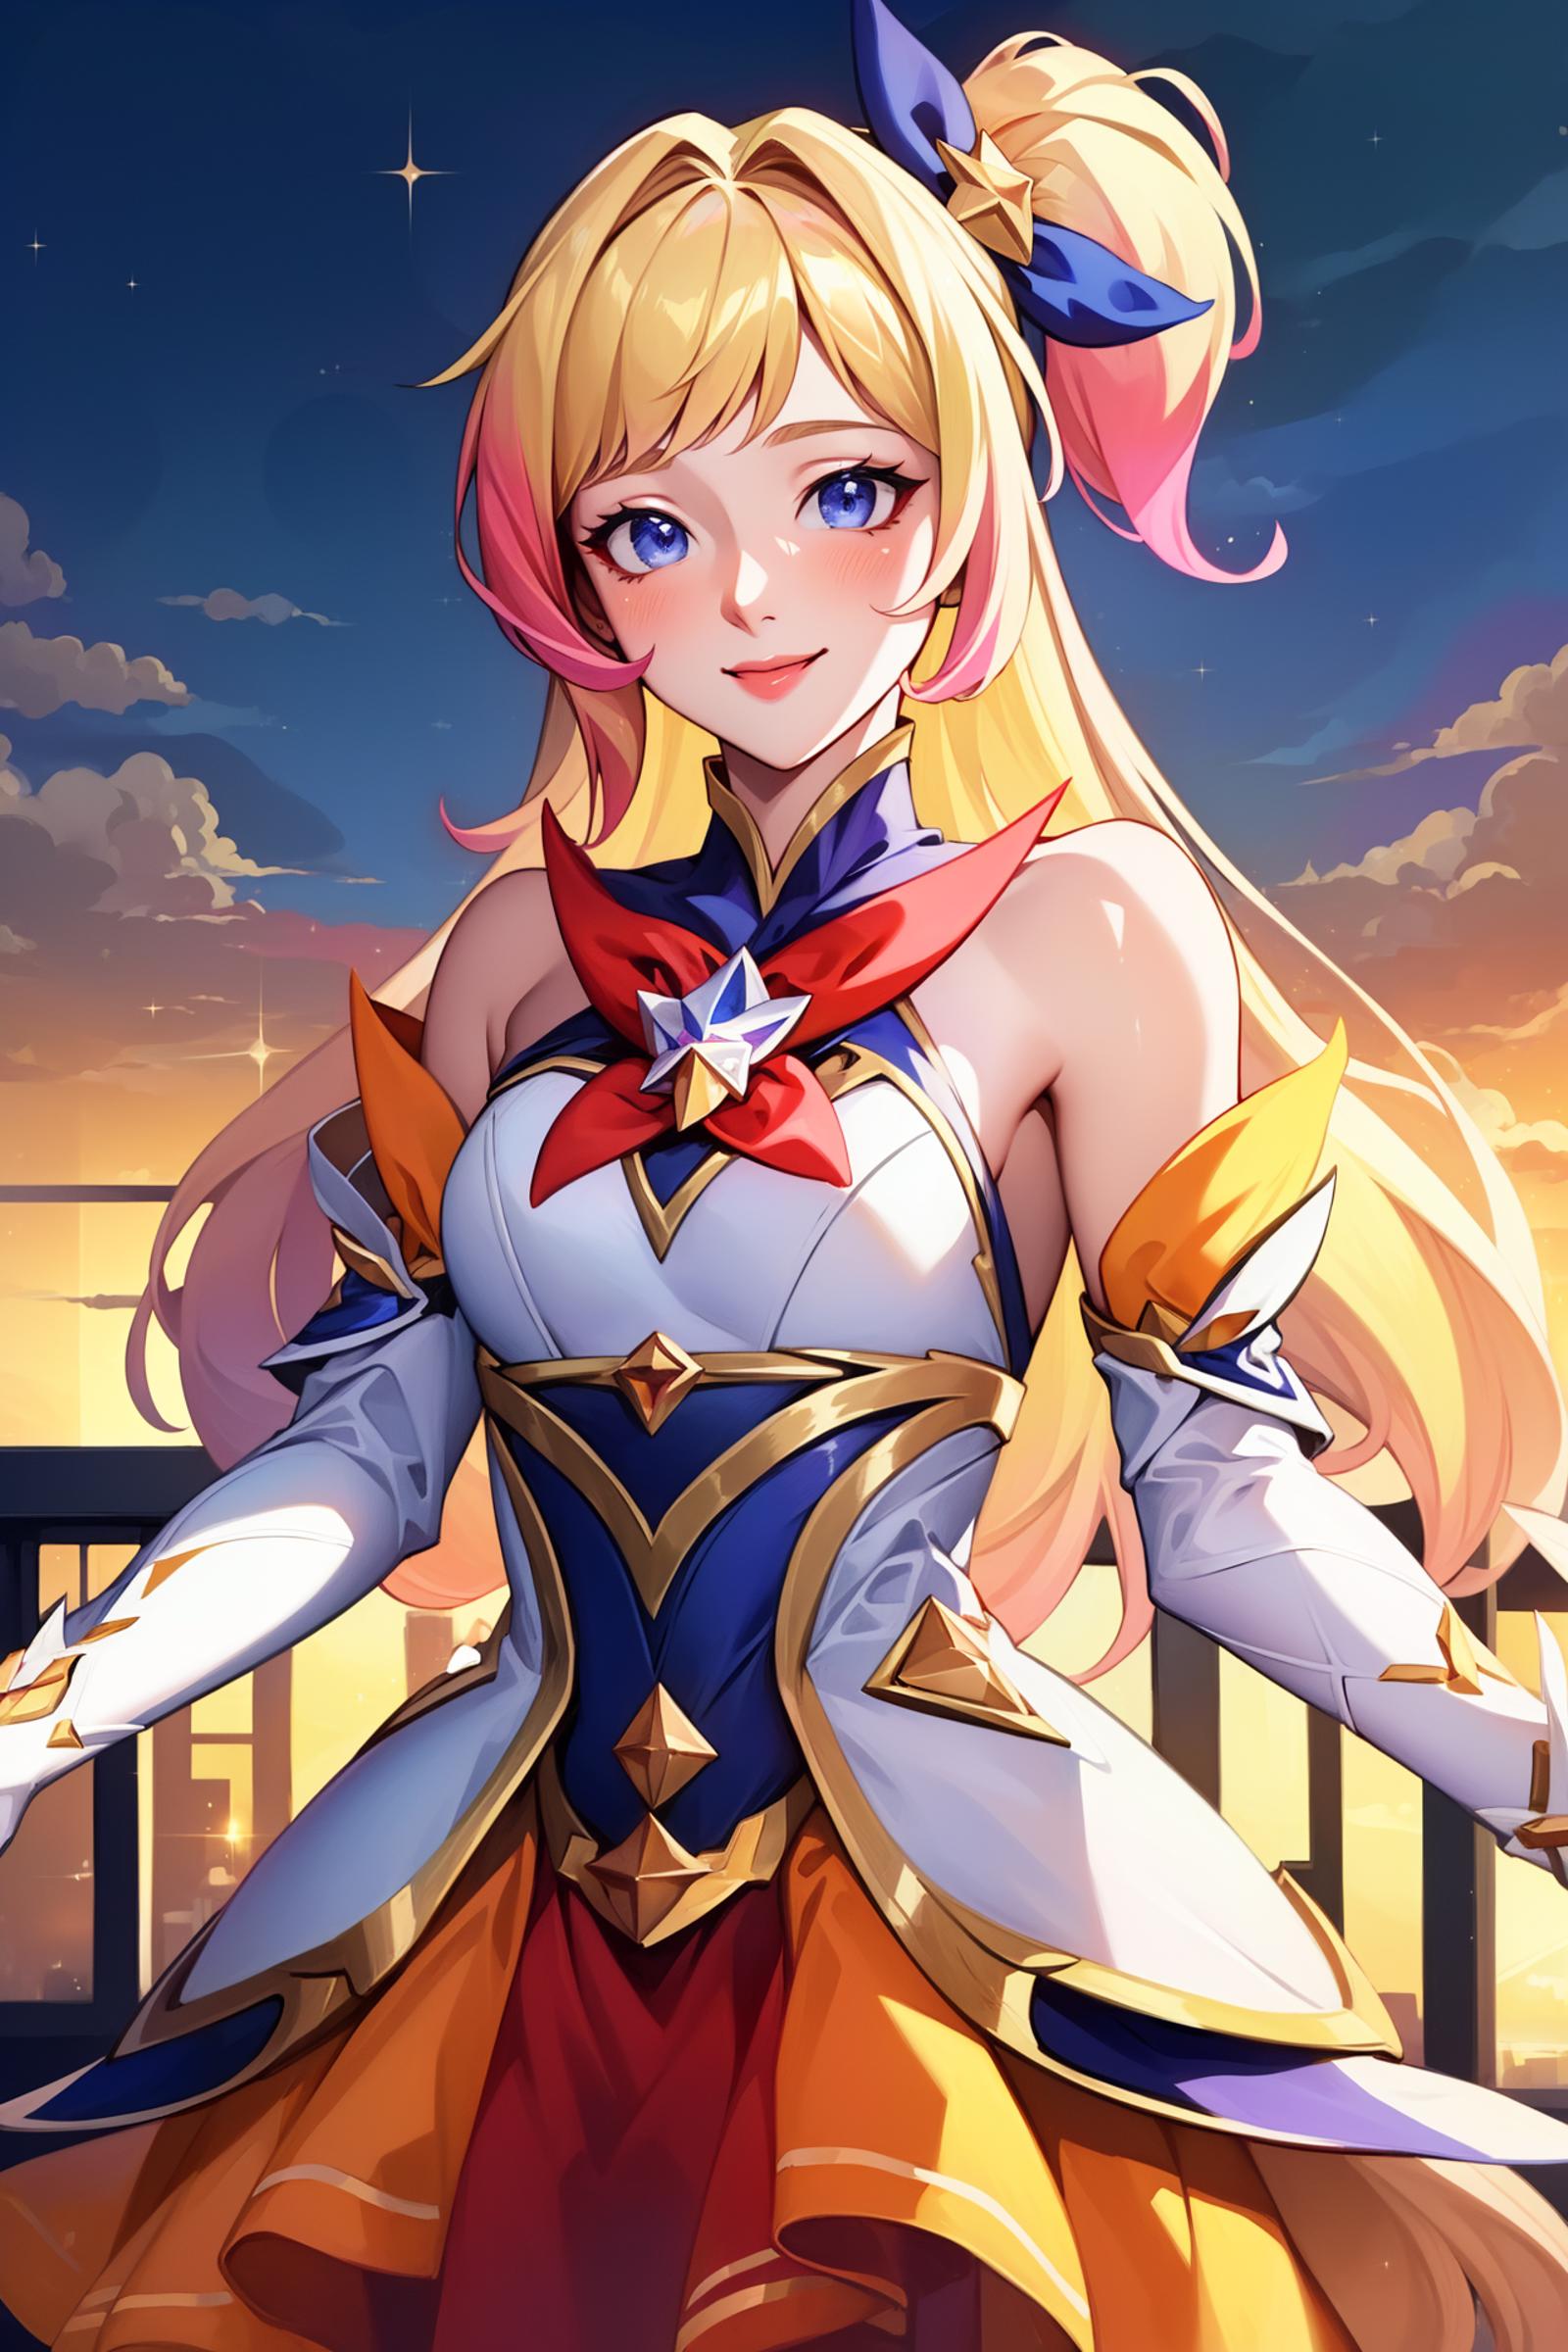 Star Guardian Seraphine and Orianna | League of Legends image by AhriMain